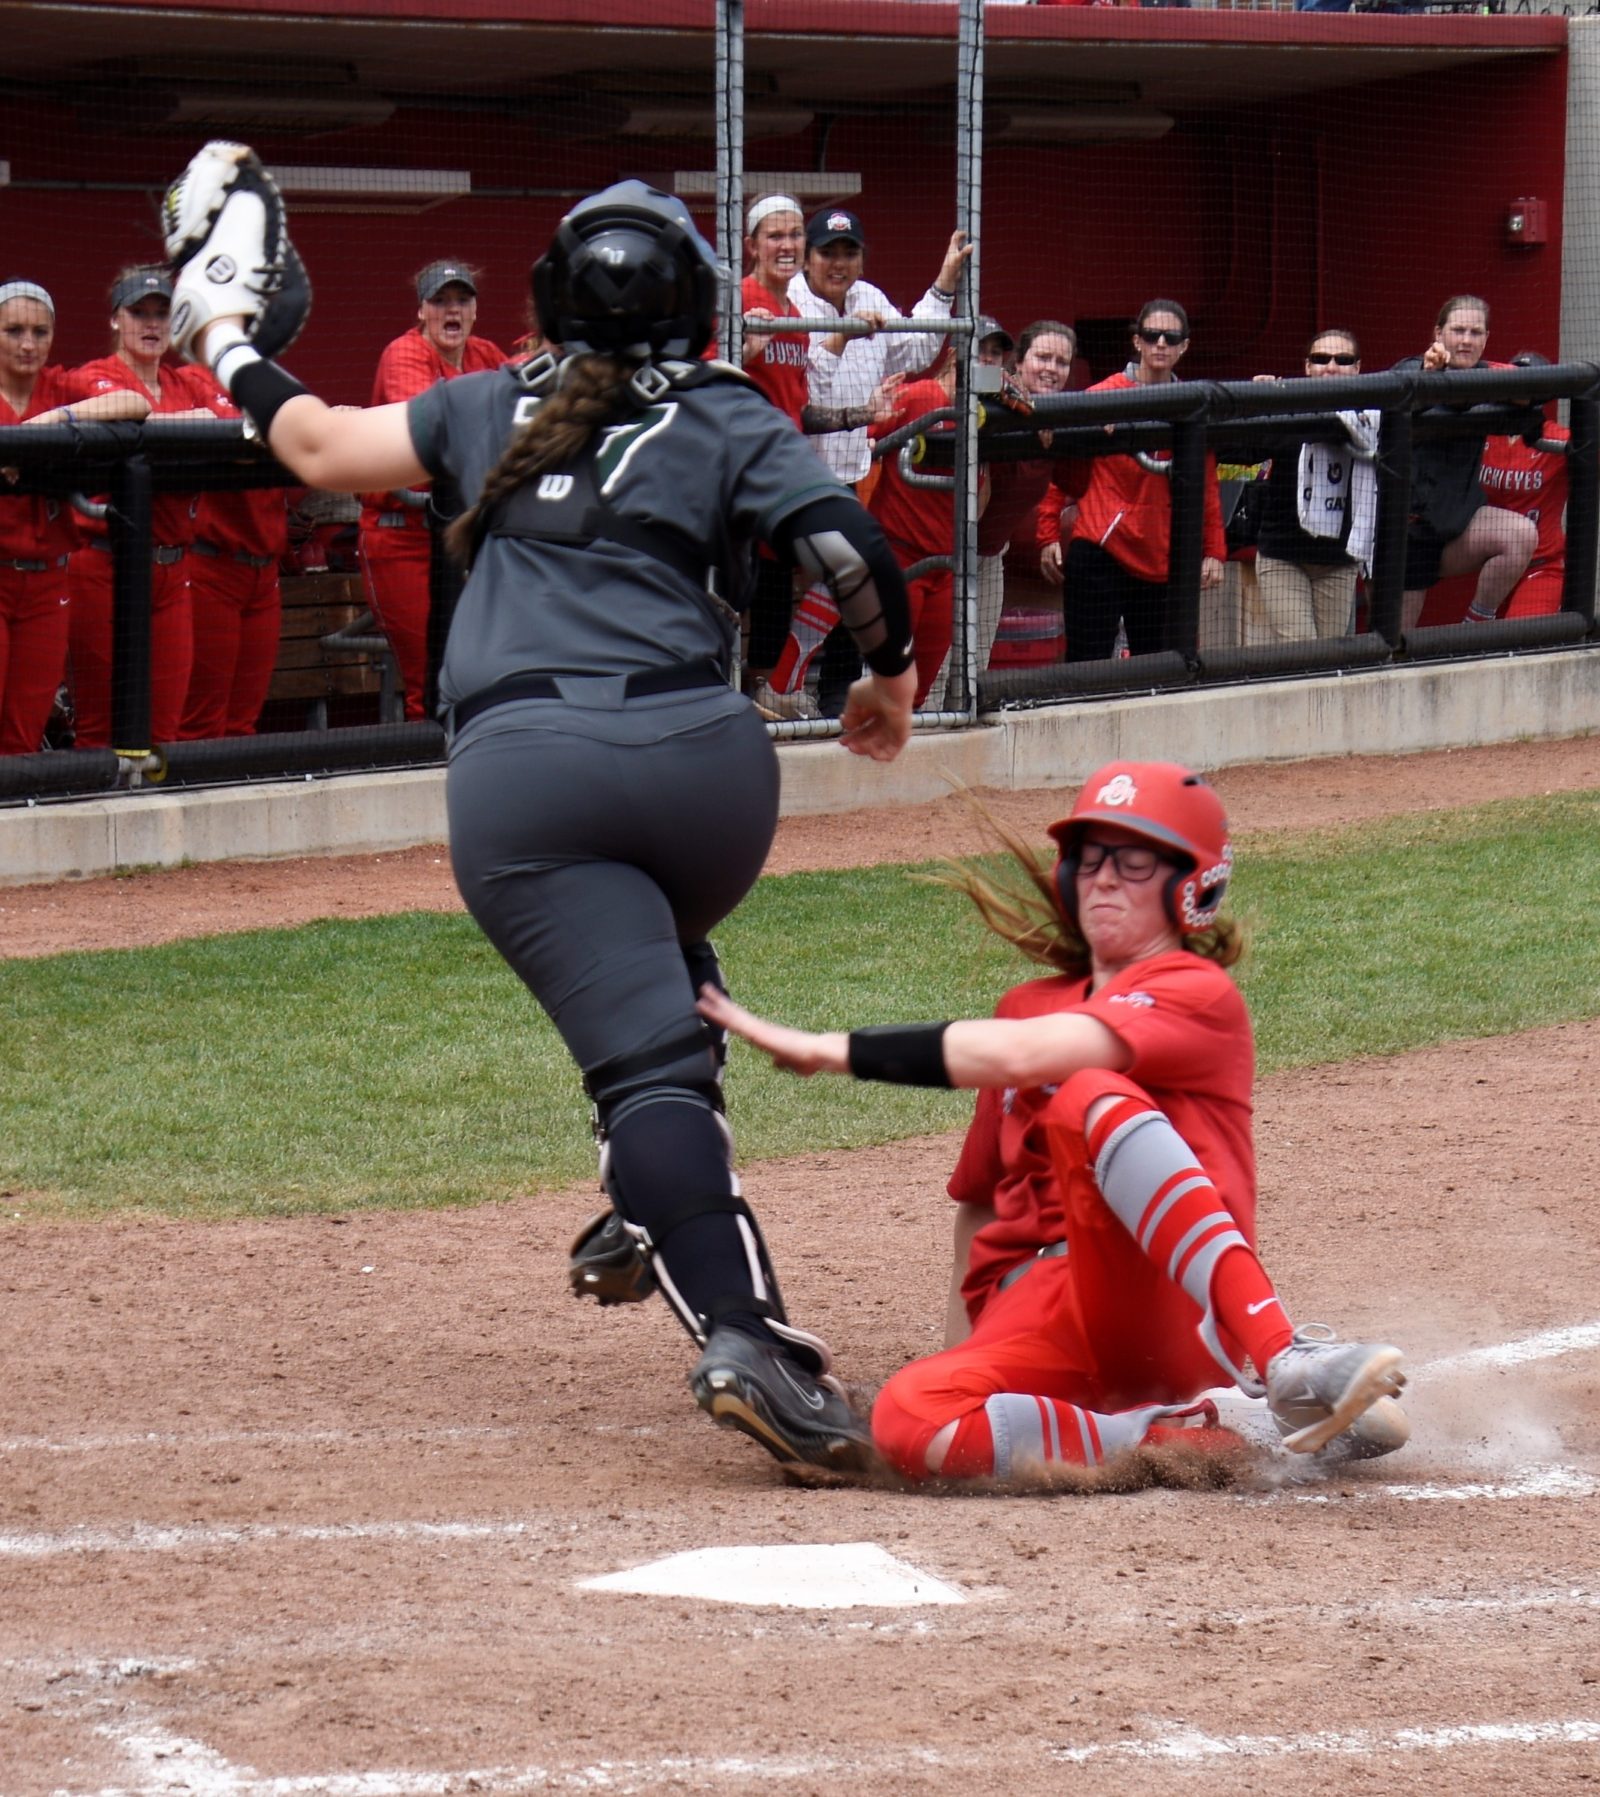 Shelby McCombs slides into home for the winning run